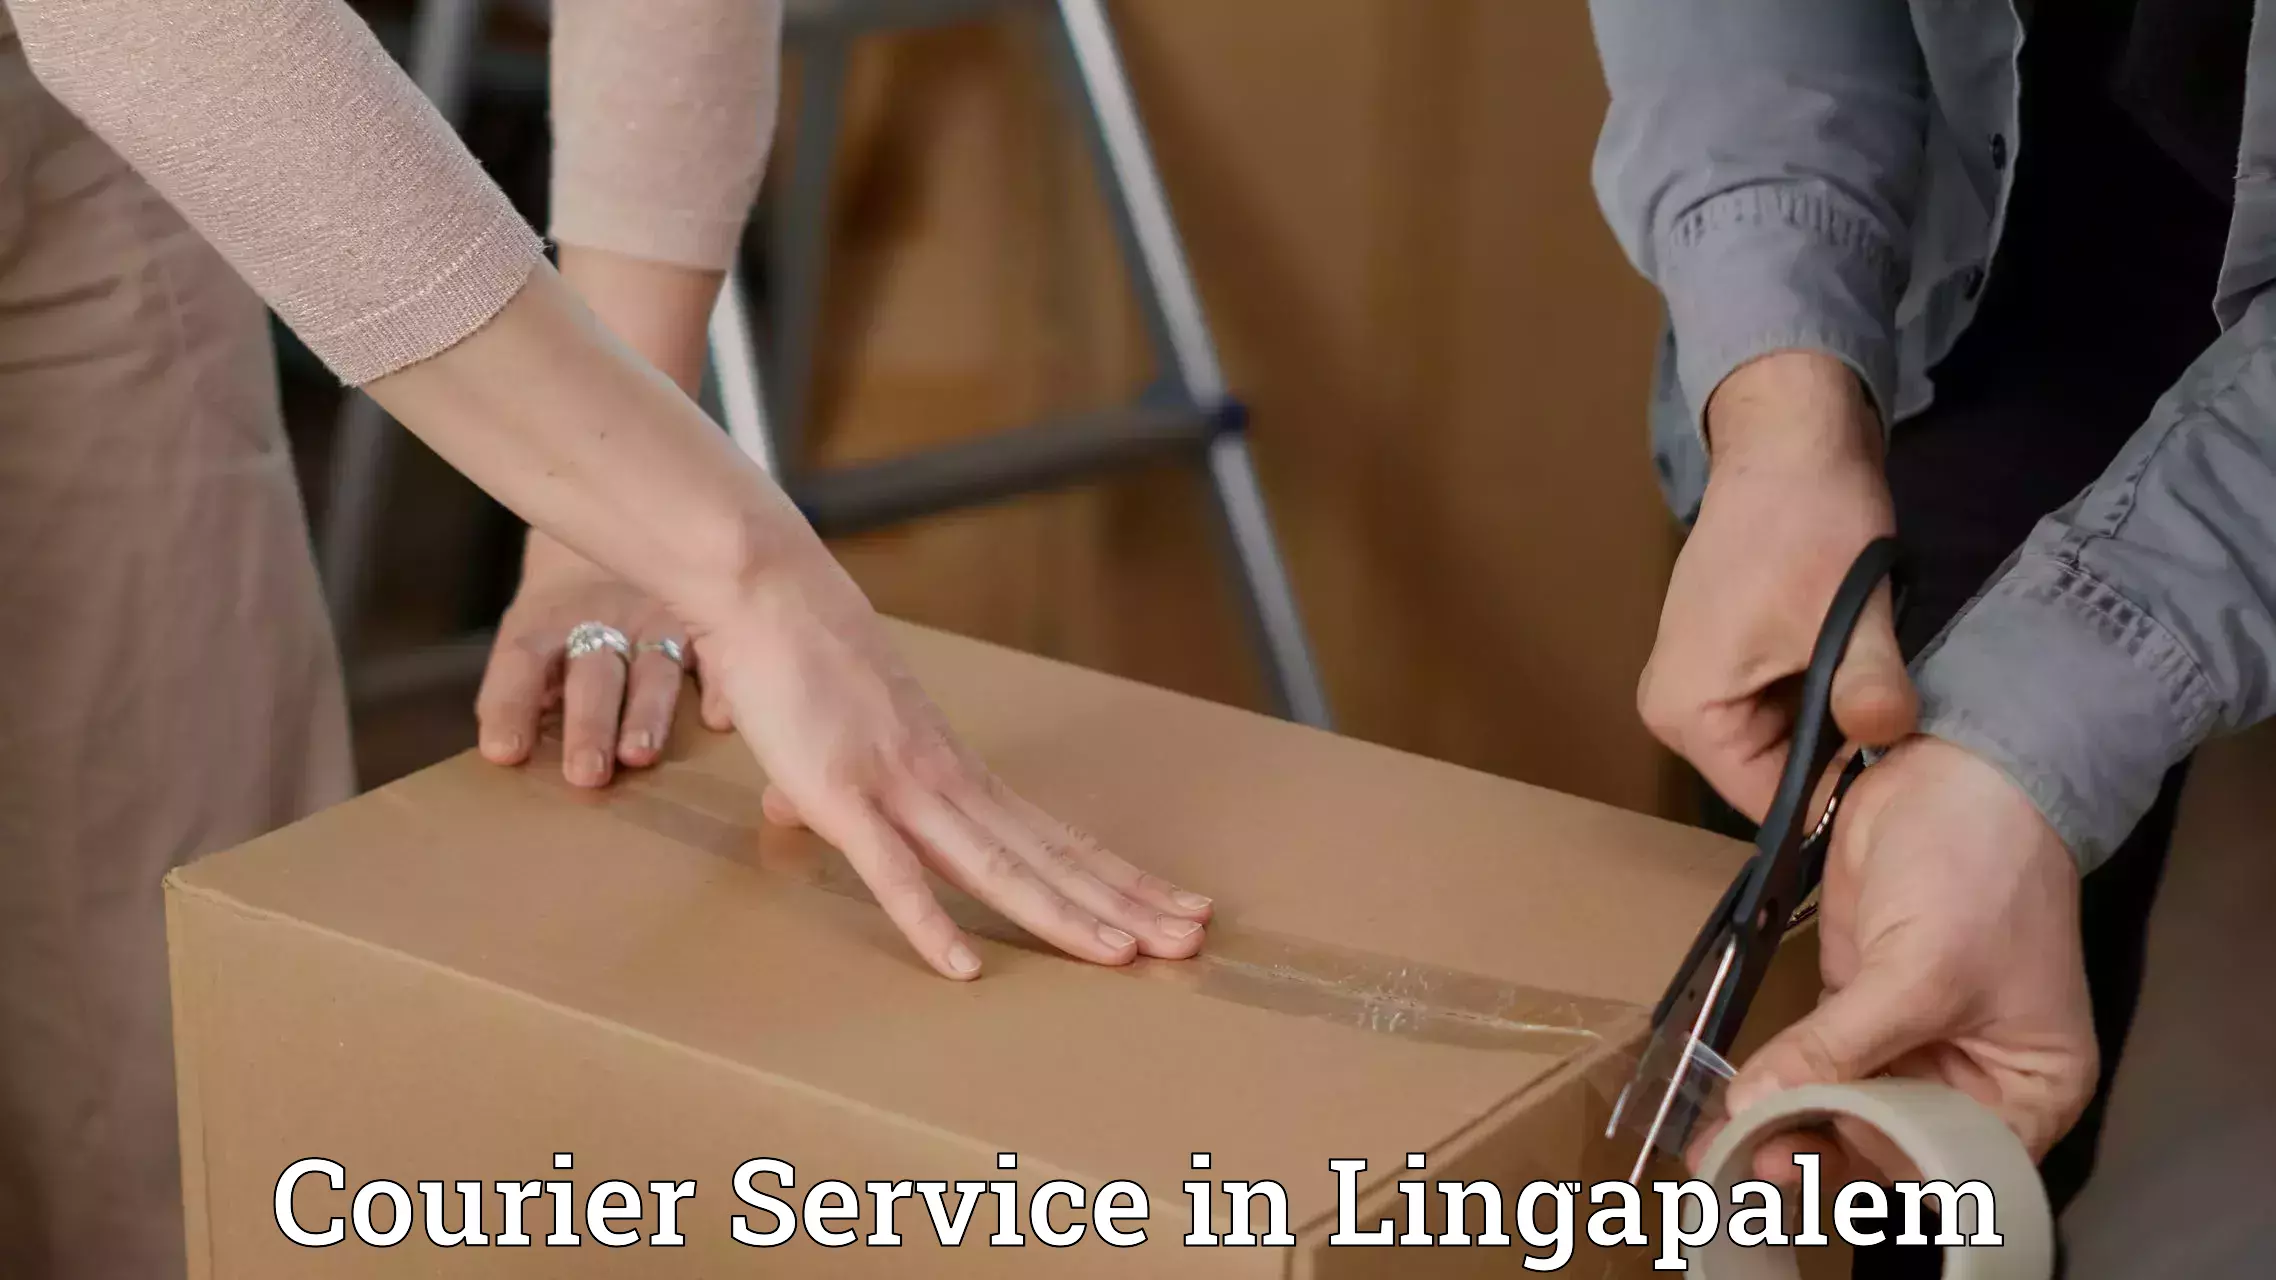 Comprehensive shipping strategies in Lingapalem